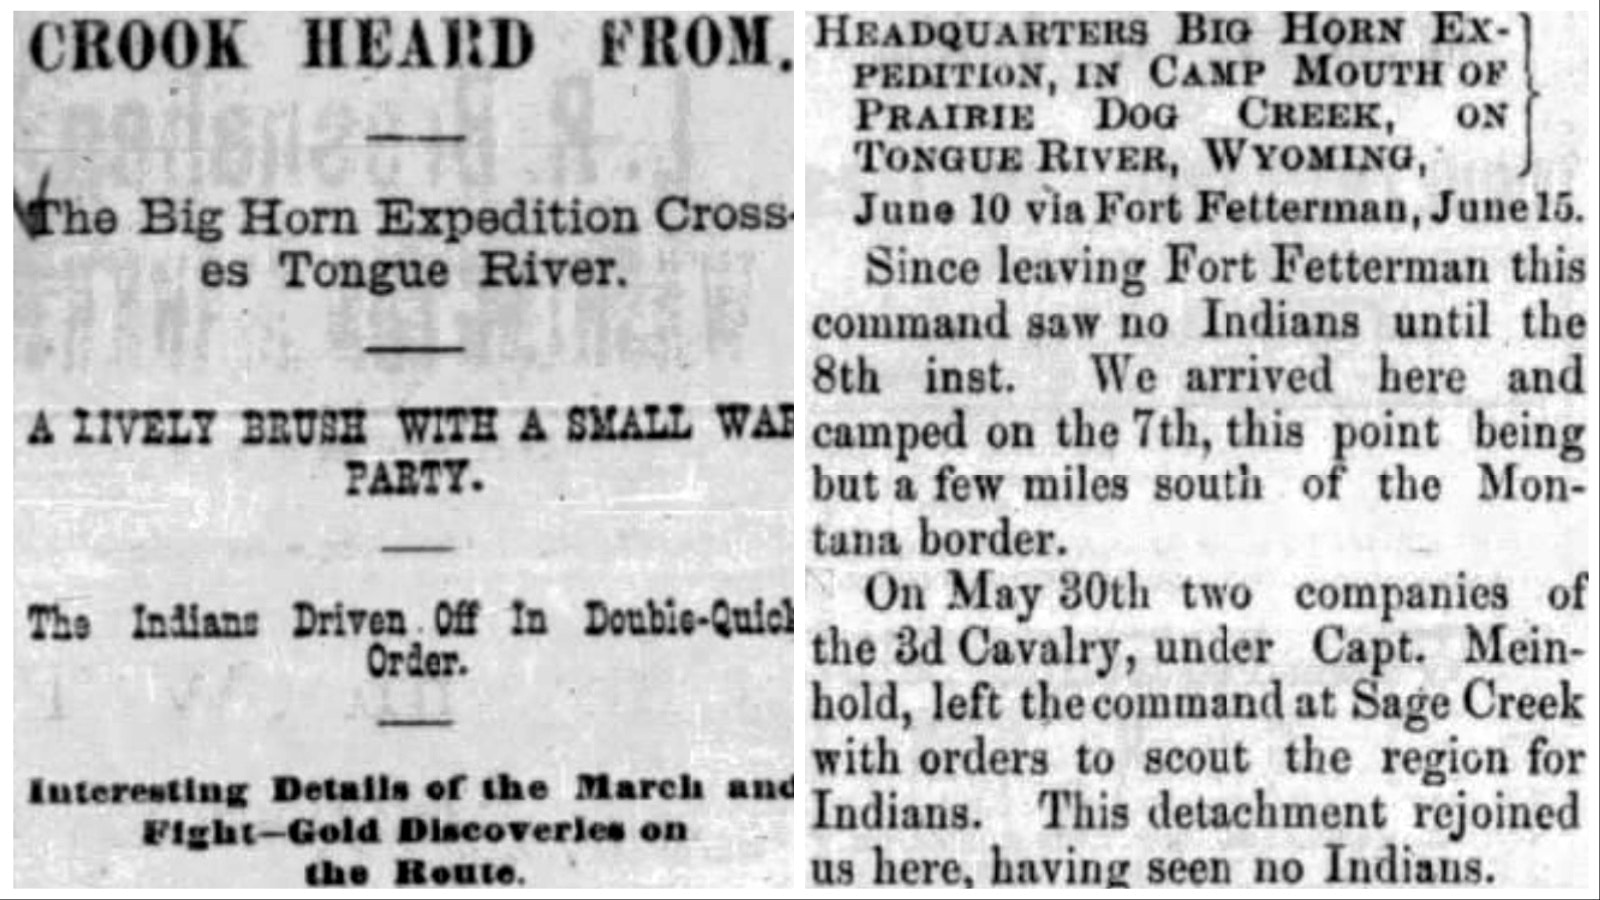 Cheyenne’s Democratic Leader carried an account of the Crook expedition on June 16, 1876, that recounted a brush with a small band of Native Americans.